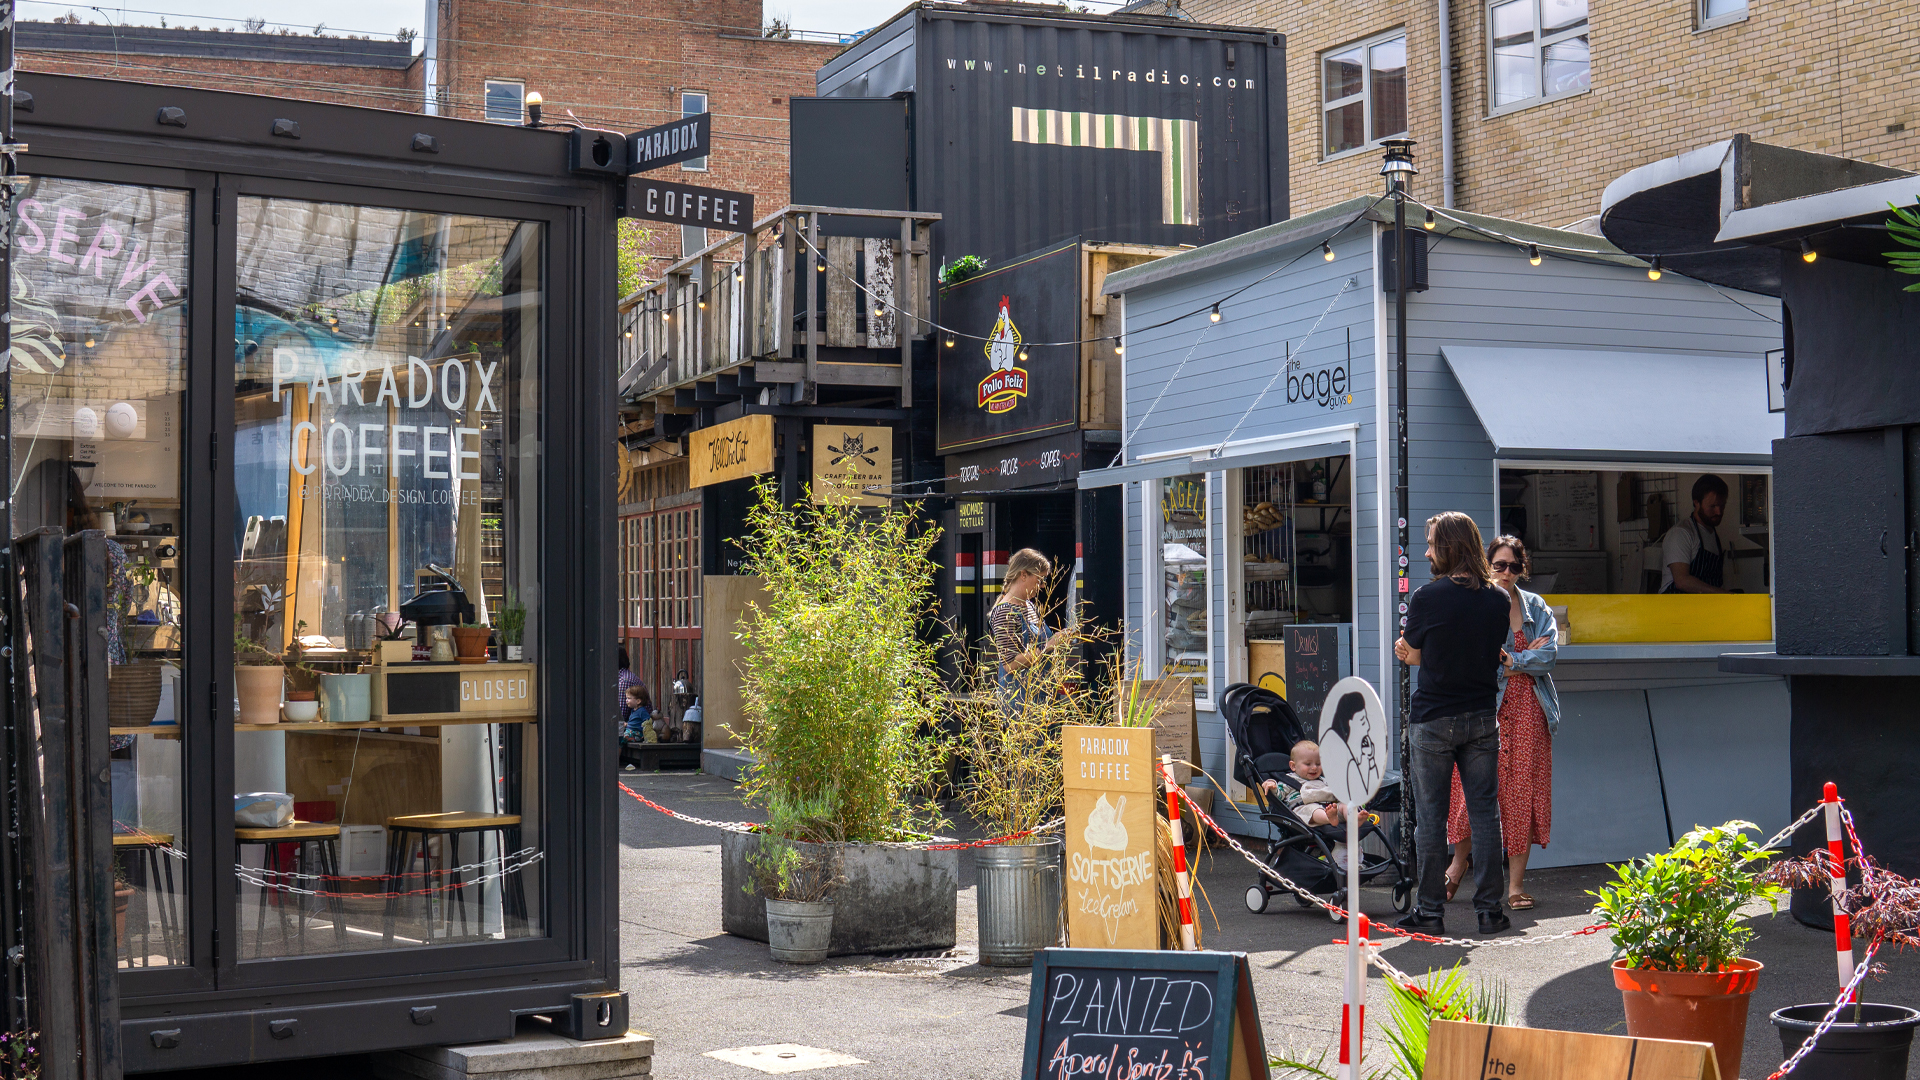 Pop-up shops can help revitalize hard-hit business districts and main  streets